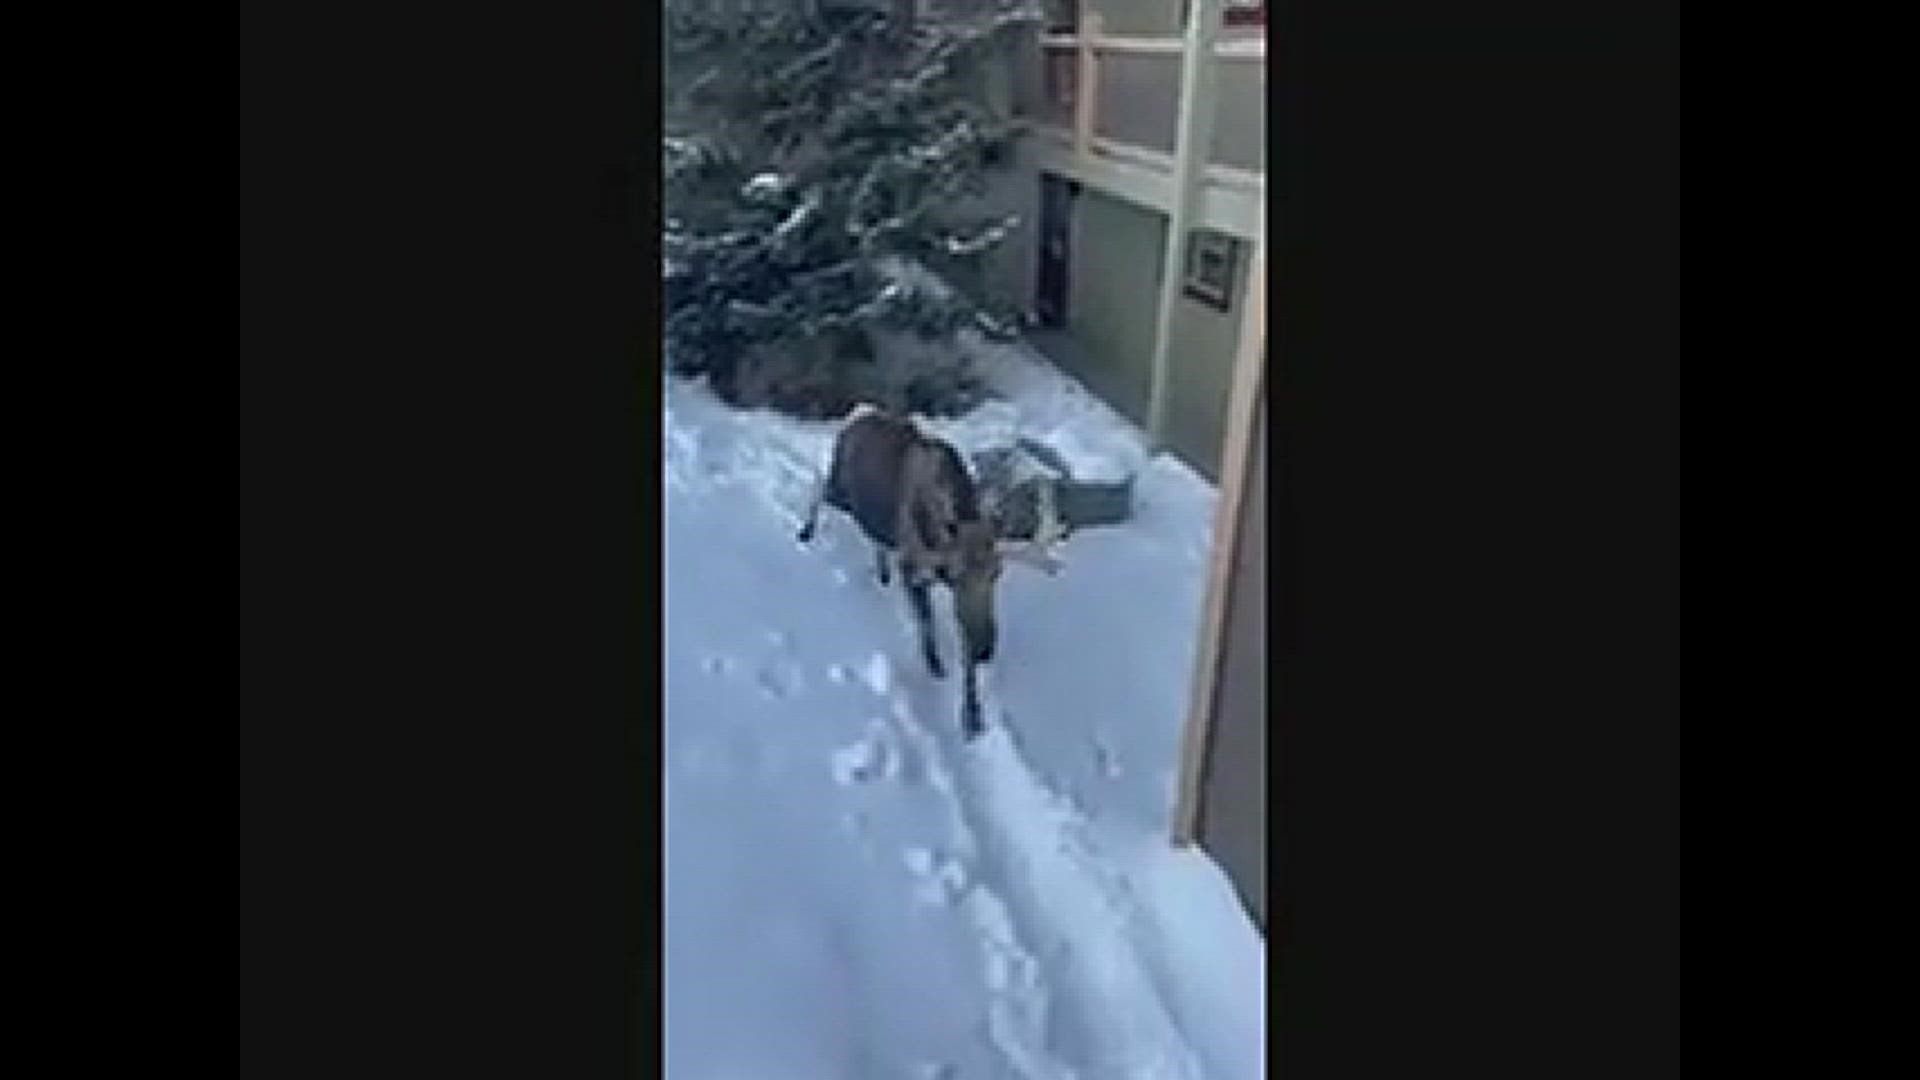 A moose walking directly underneath me while standing on the walkway of my building in Silverthorne, CO
Nicky Johnson